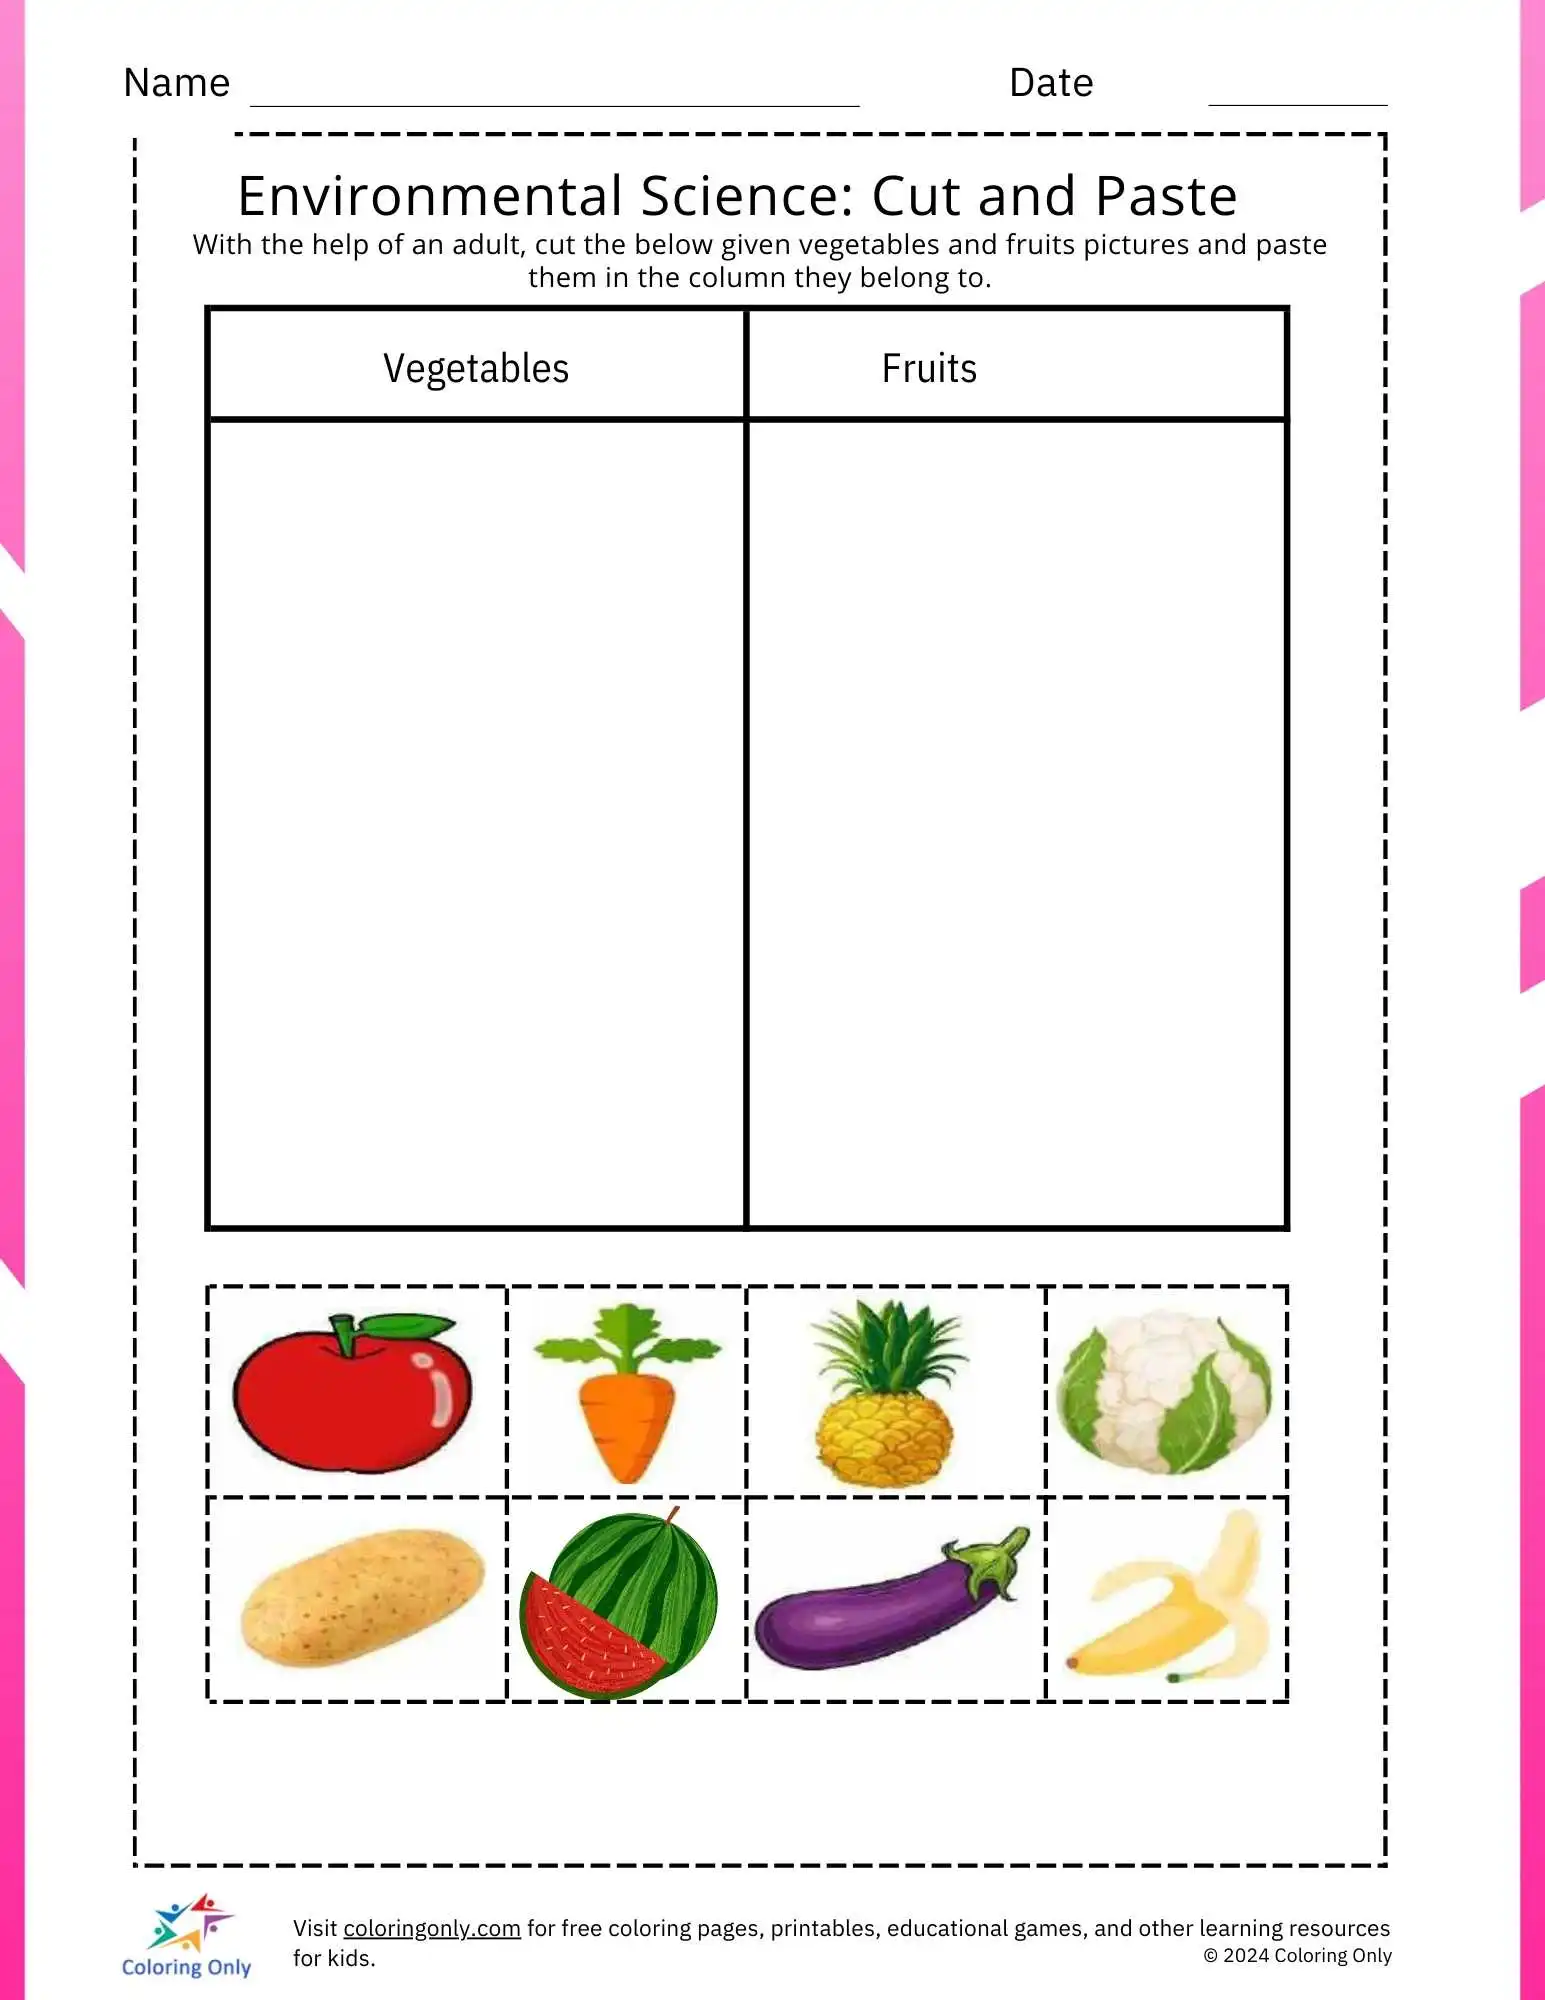 Explore fruits and vegetables categorization with this engaging free printable science worksheet.